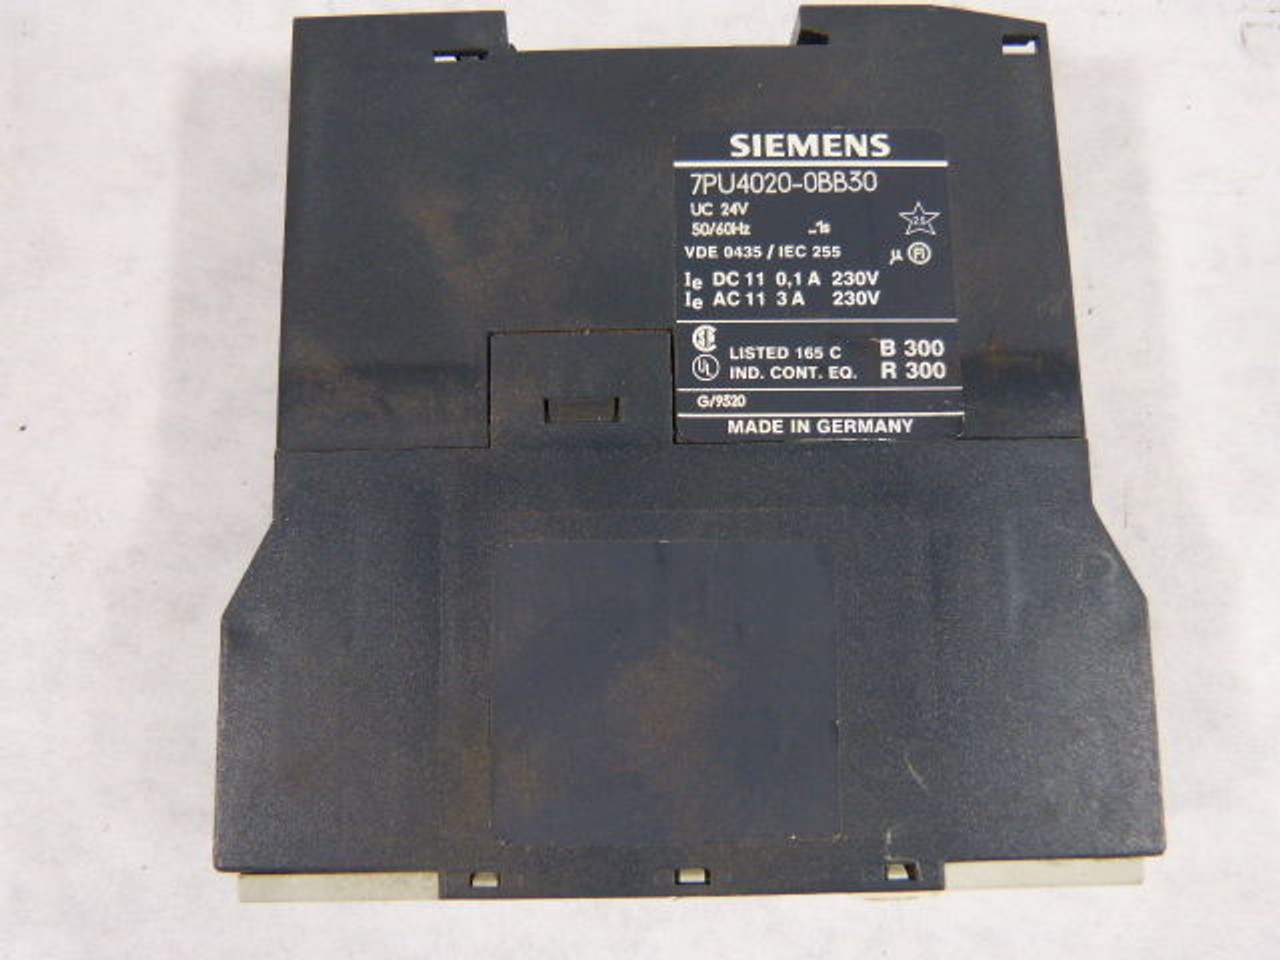 Siemens 7PU4020-0BB30 Time Delay Relay USED